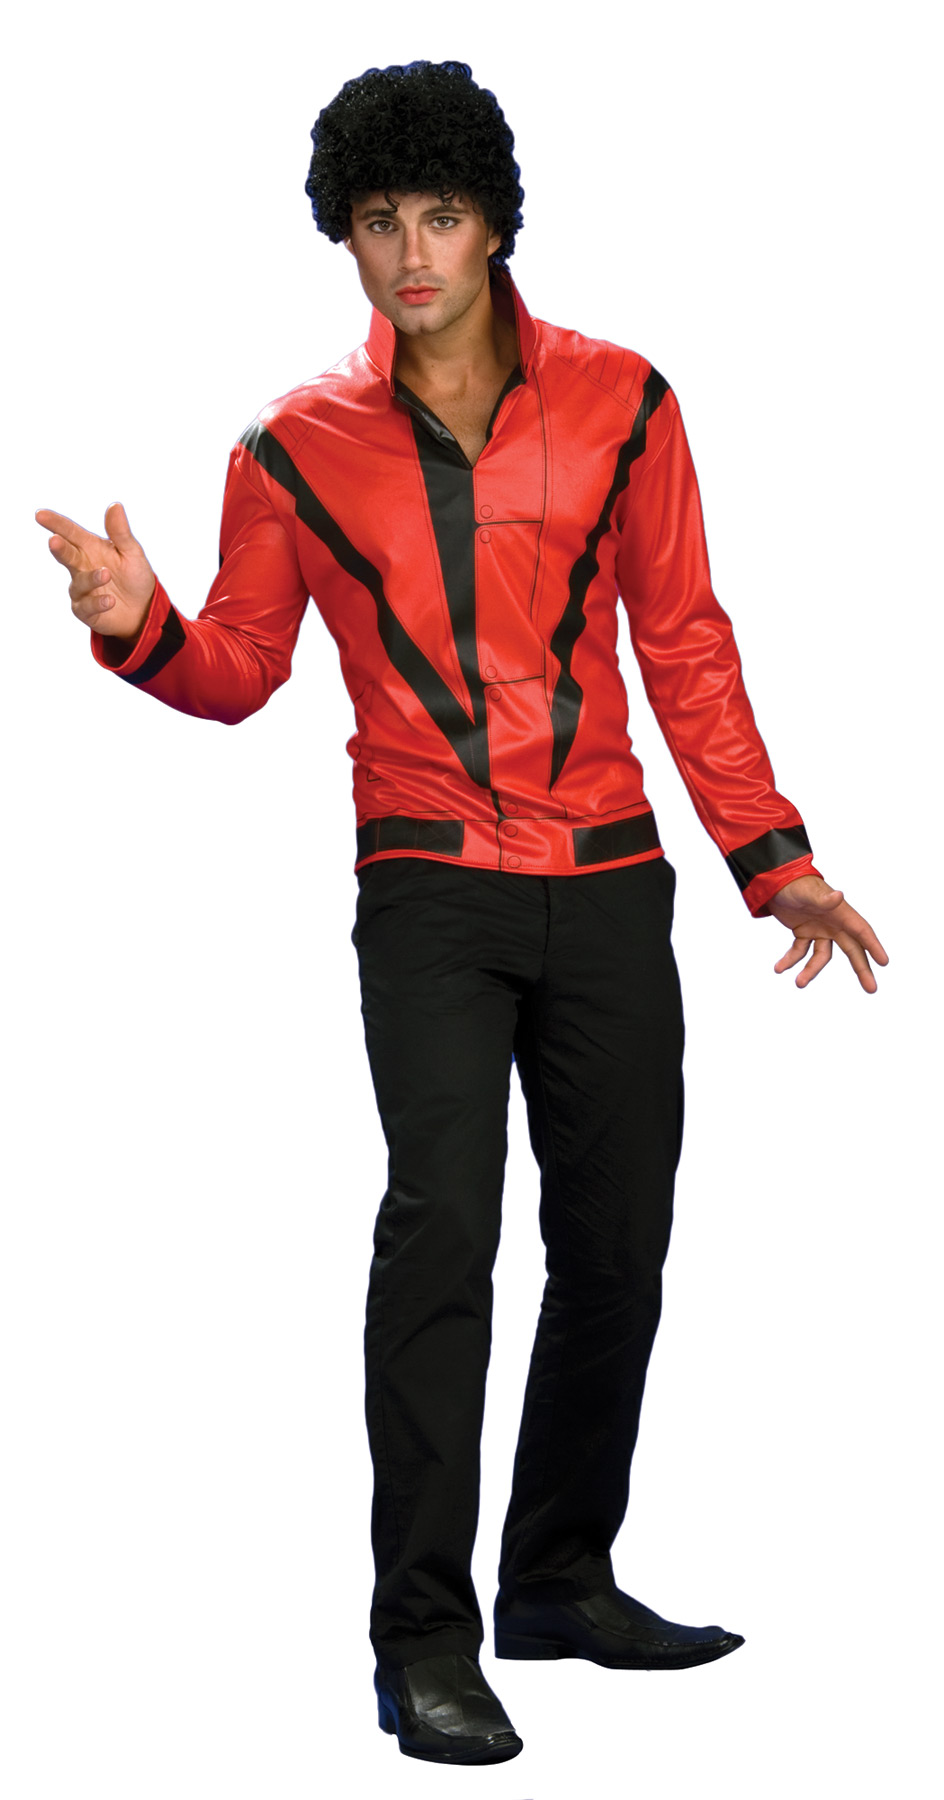 Men's Red Thriller Jacket Costume - Michael Jackson by Spirit Halloween -  The Party Place - Conway